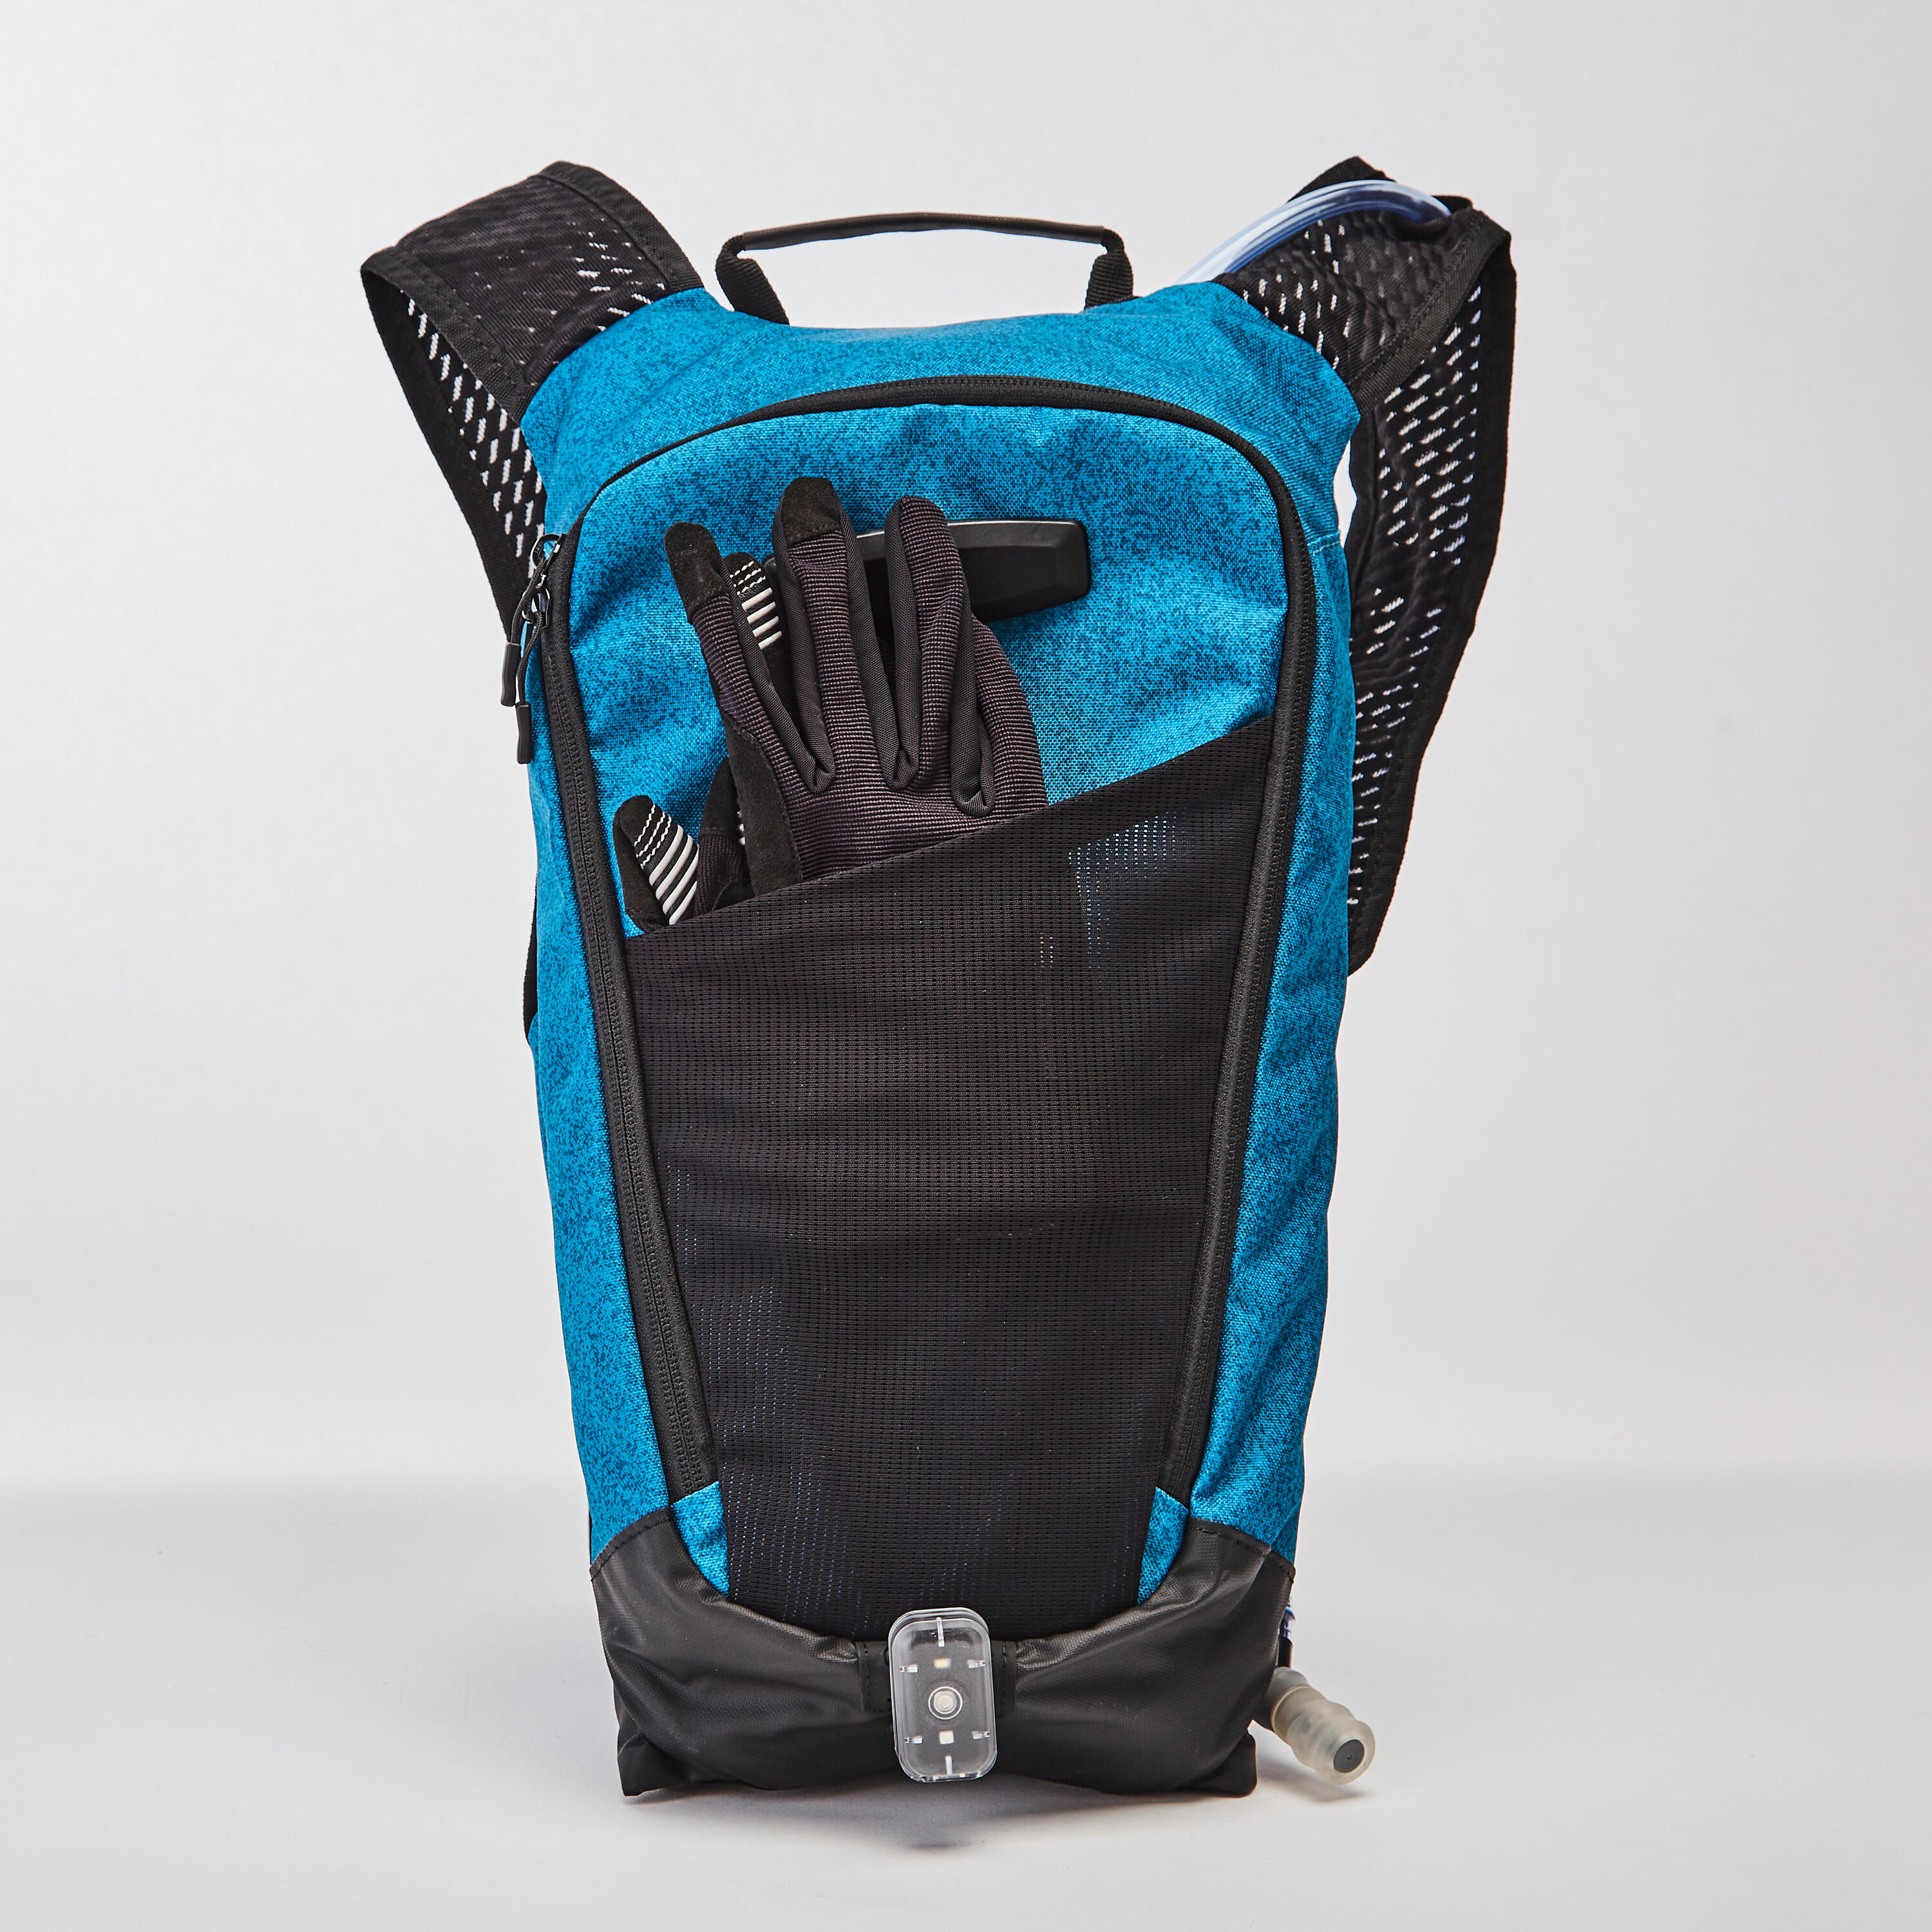 Mountain Bike Hydration Backpack Explore 7L/2L Water - Turquoise Blue 13/18